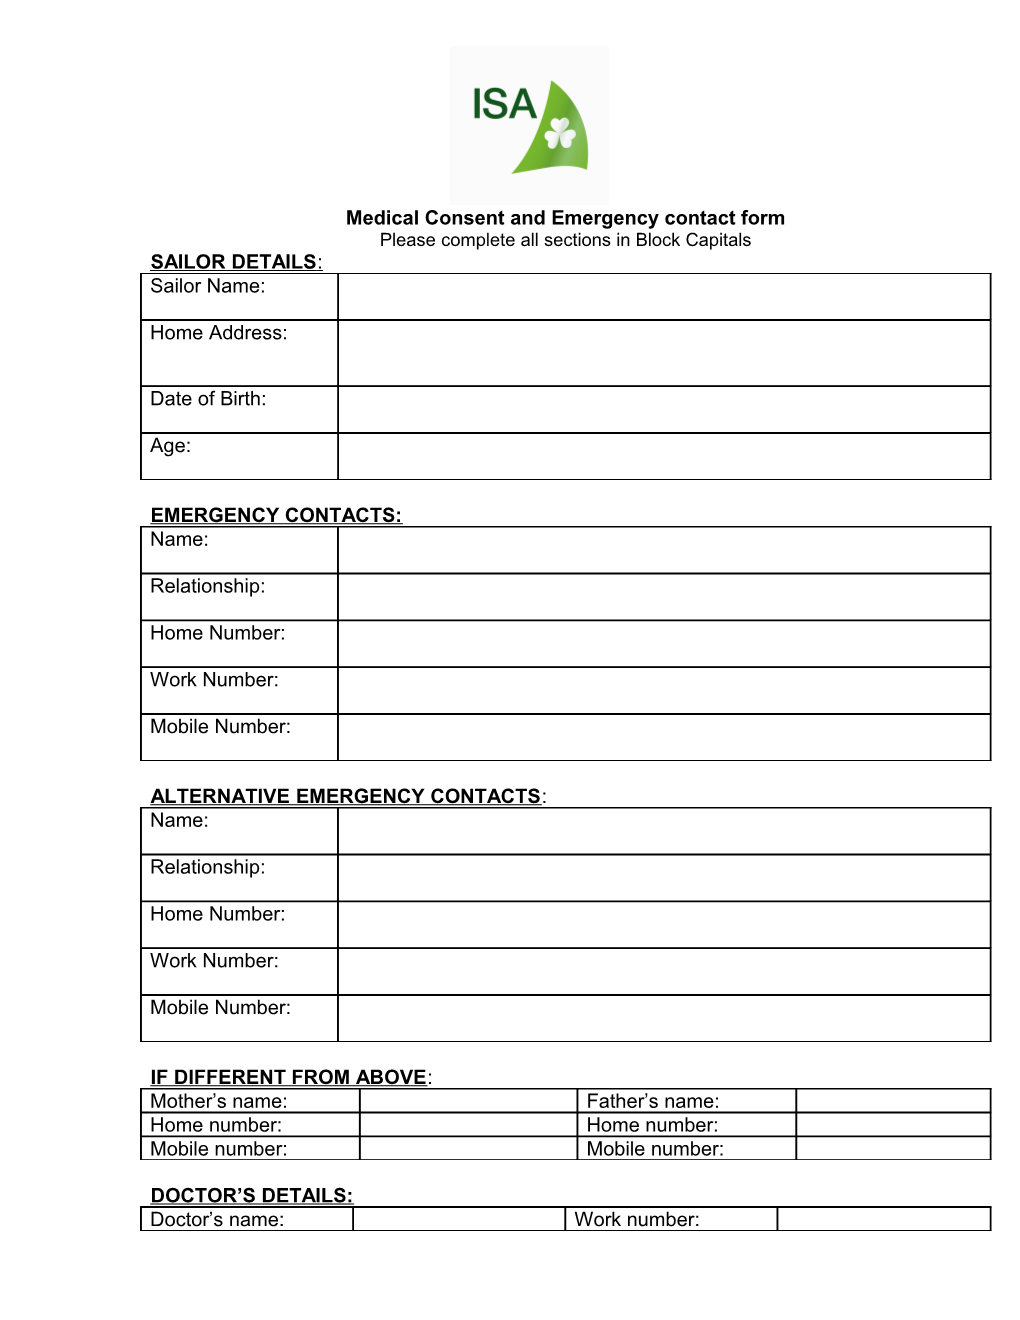 Medical Consent and Emergency Contact Form